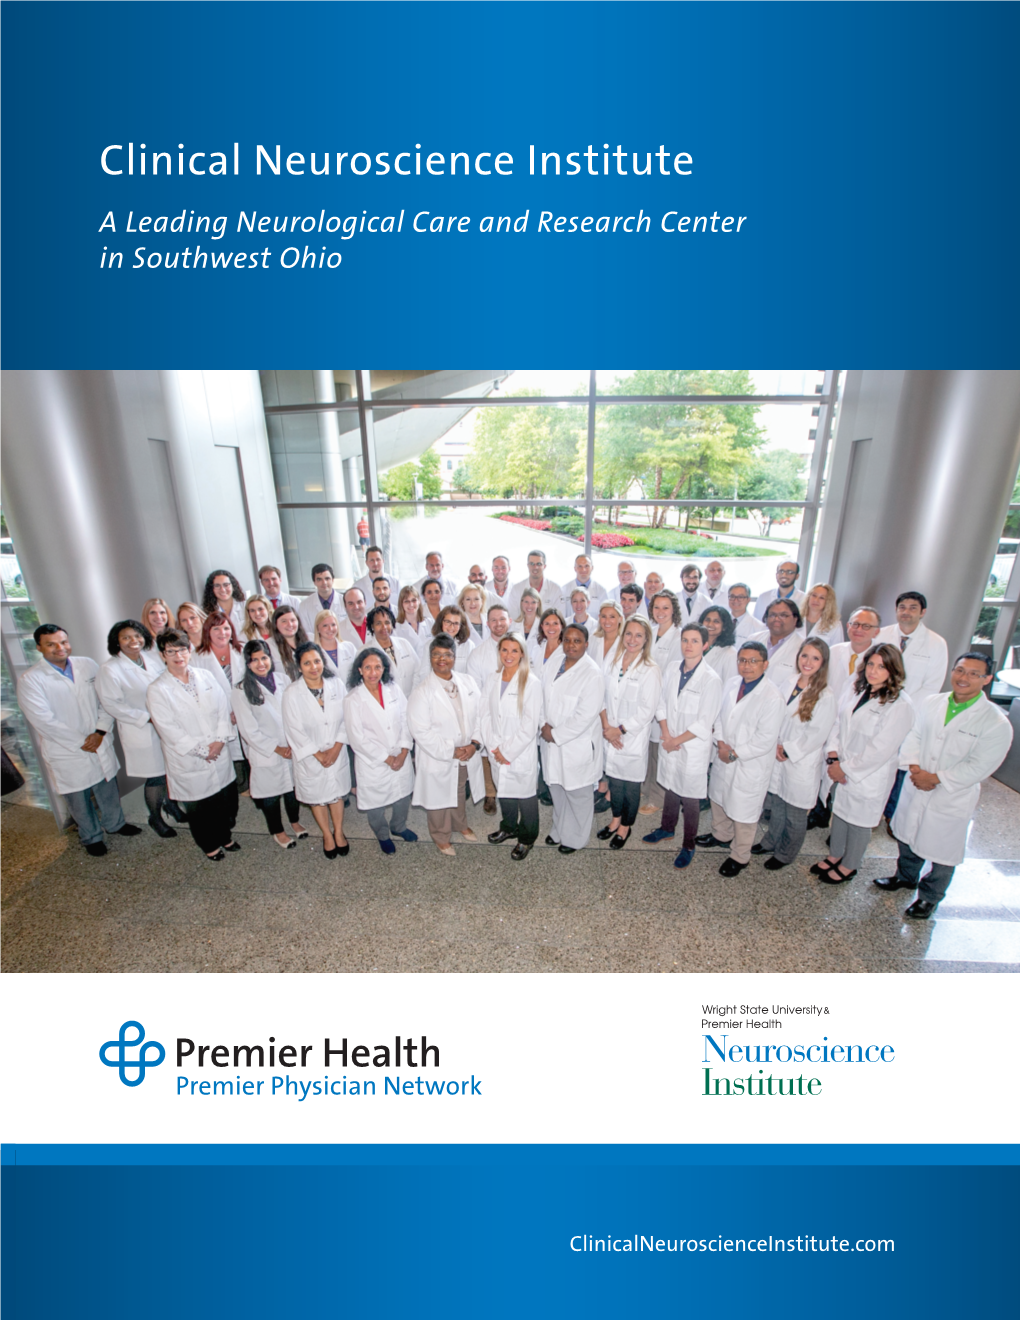 Clinical Neuroscience Institute a Leading Neurological Care and Research Center in Southwest Ohio